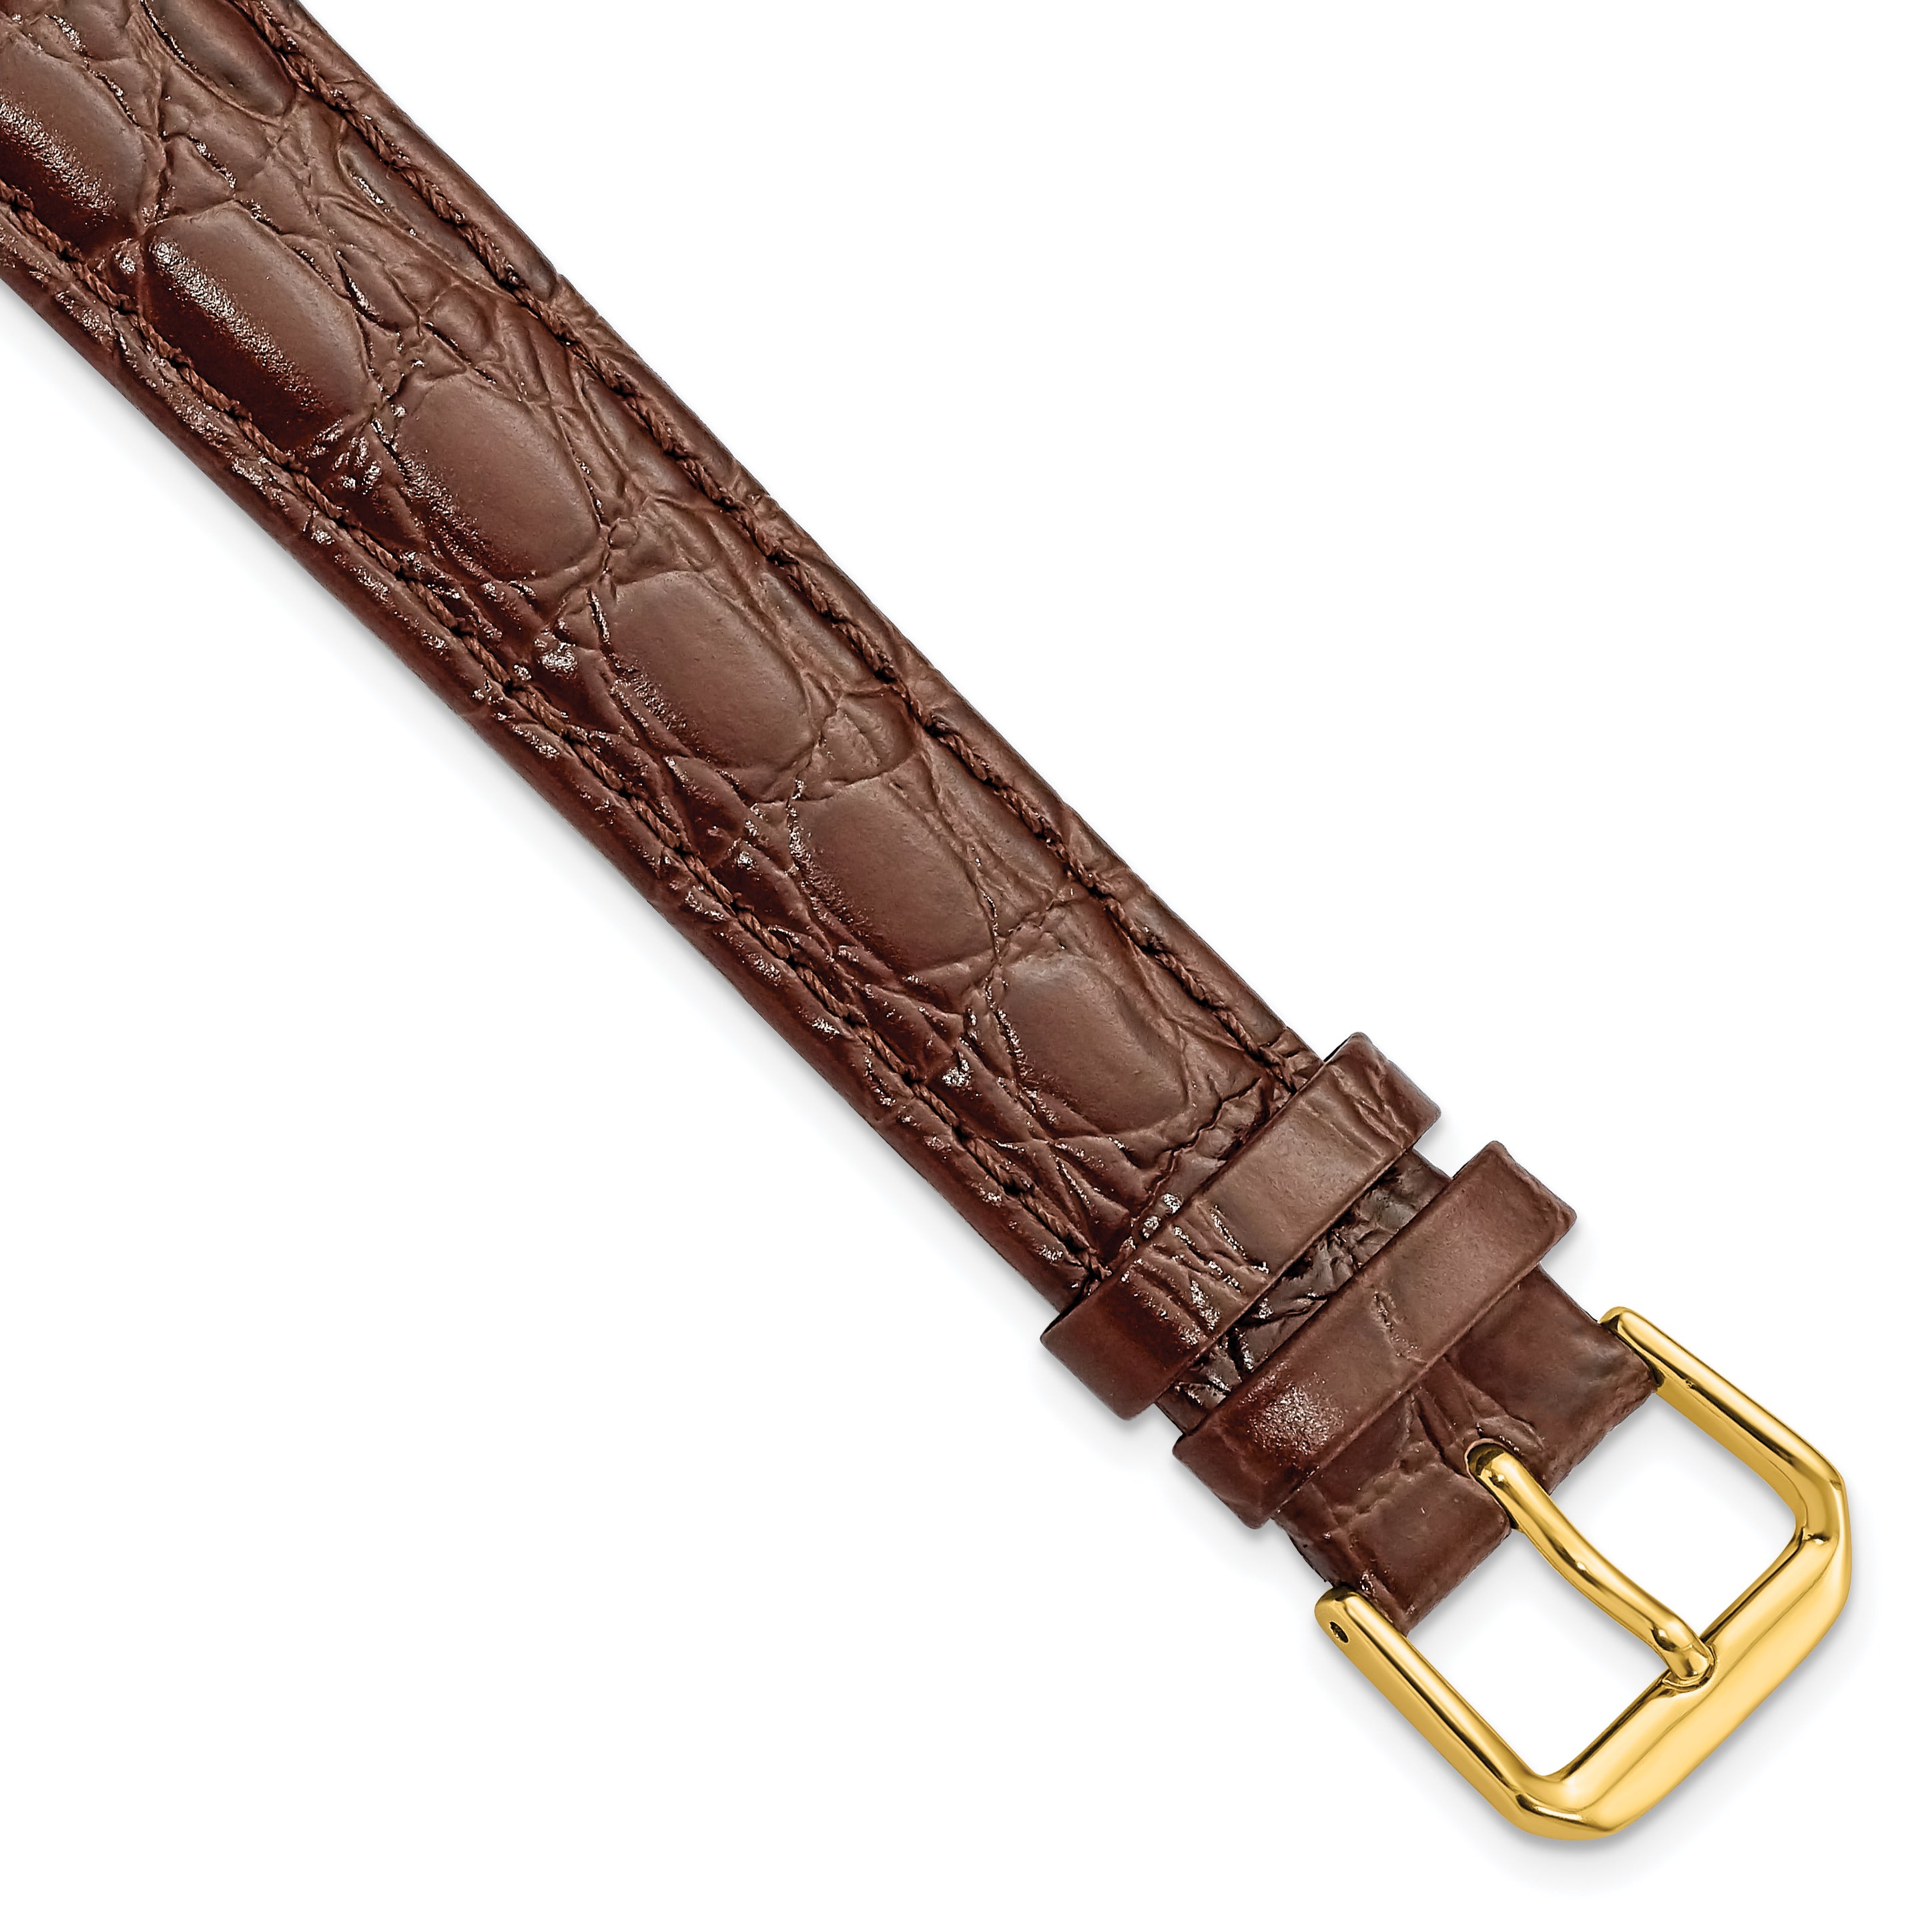 DeBeer 18mm Extra Long Brown Alligator Grain Leather with Gold-tone Buckle 9.5 inch Watch Band